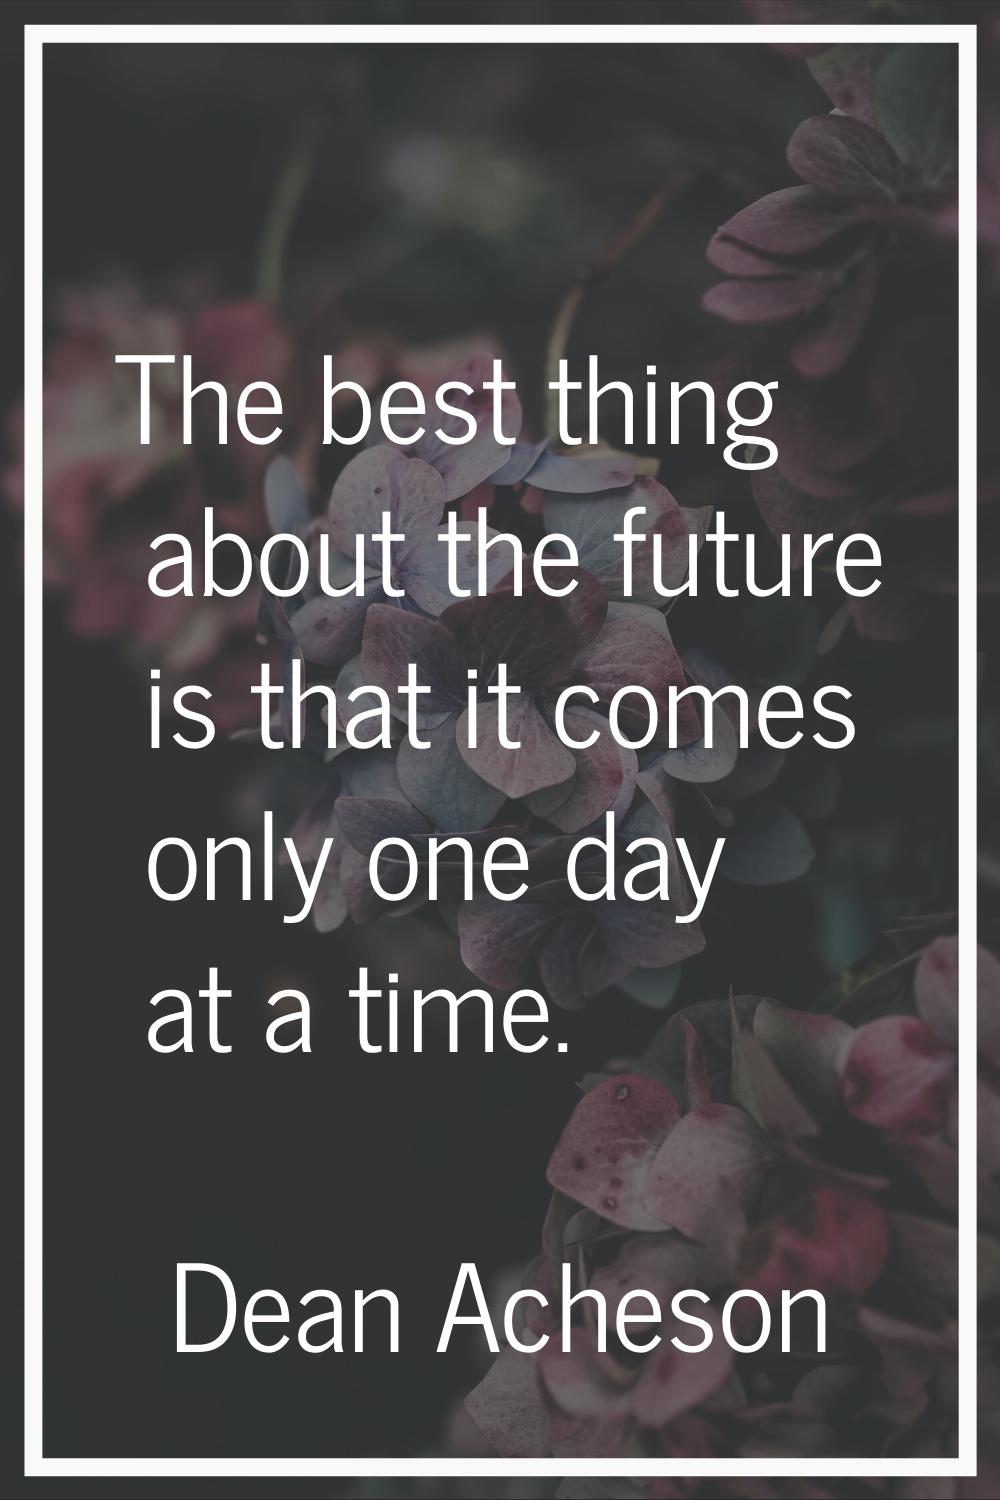 The best thing about the future is that it comes only one day at a time.